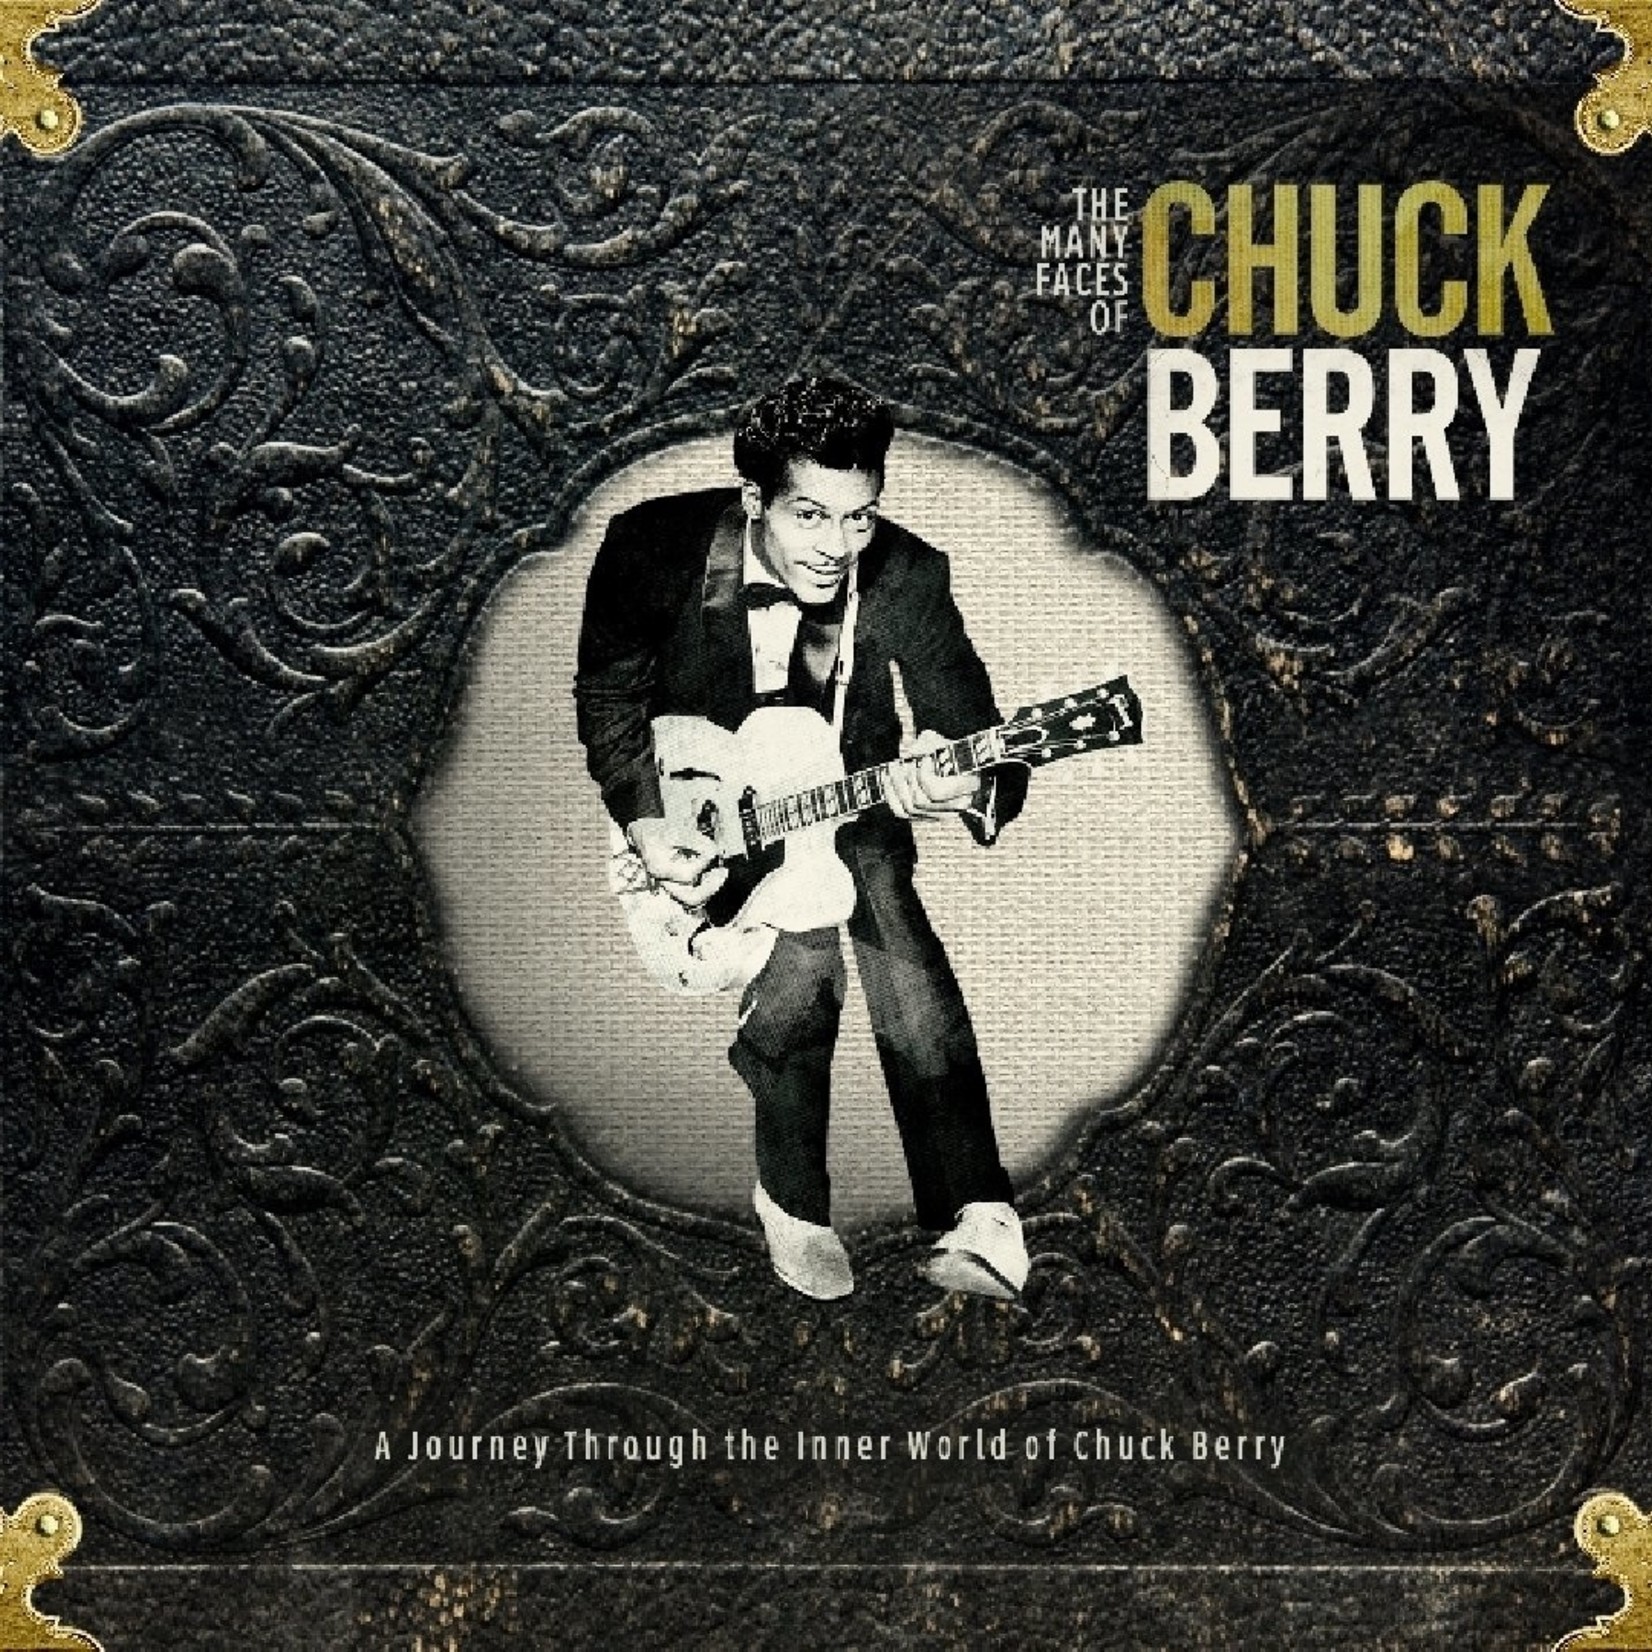 V/A - The Many Faces Of Chuck Berry (A Journey Through The Inner World Of Chuck Berry)